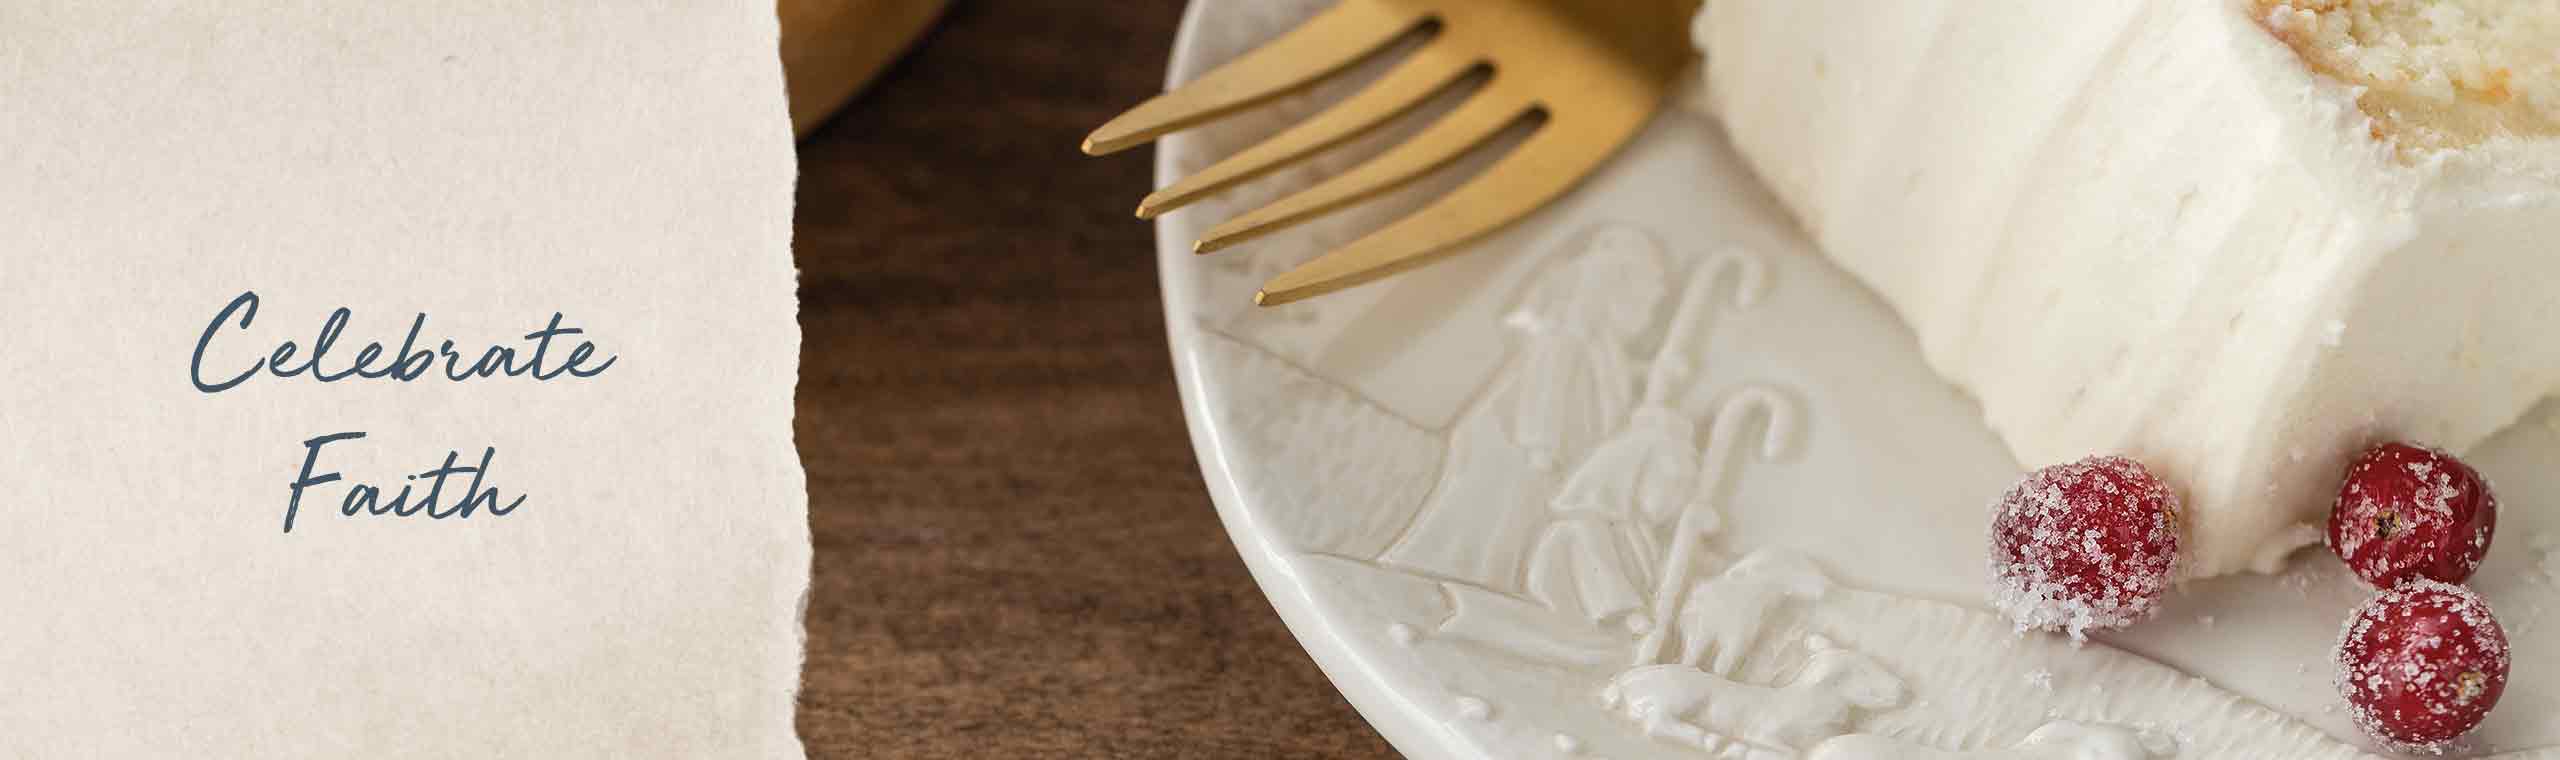 Celebrate Faith. a gold fork on a ceramic plate and some cake